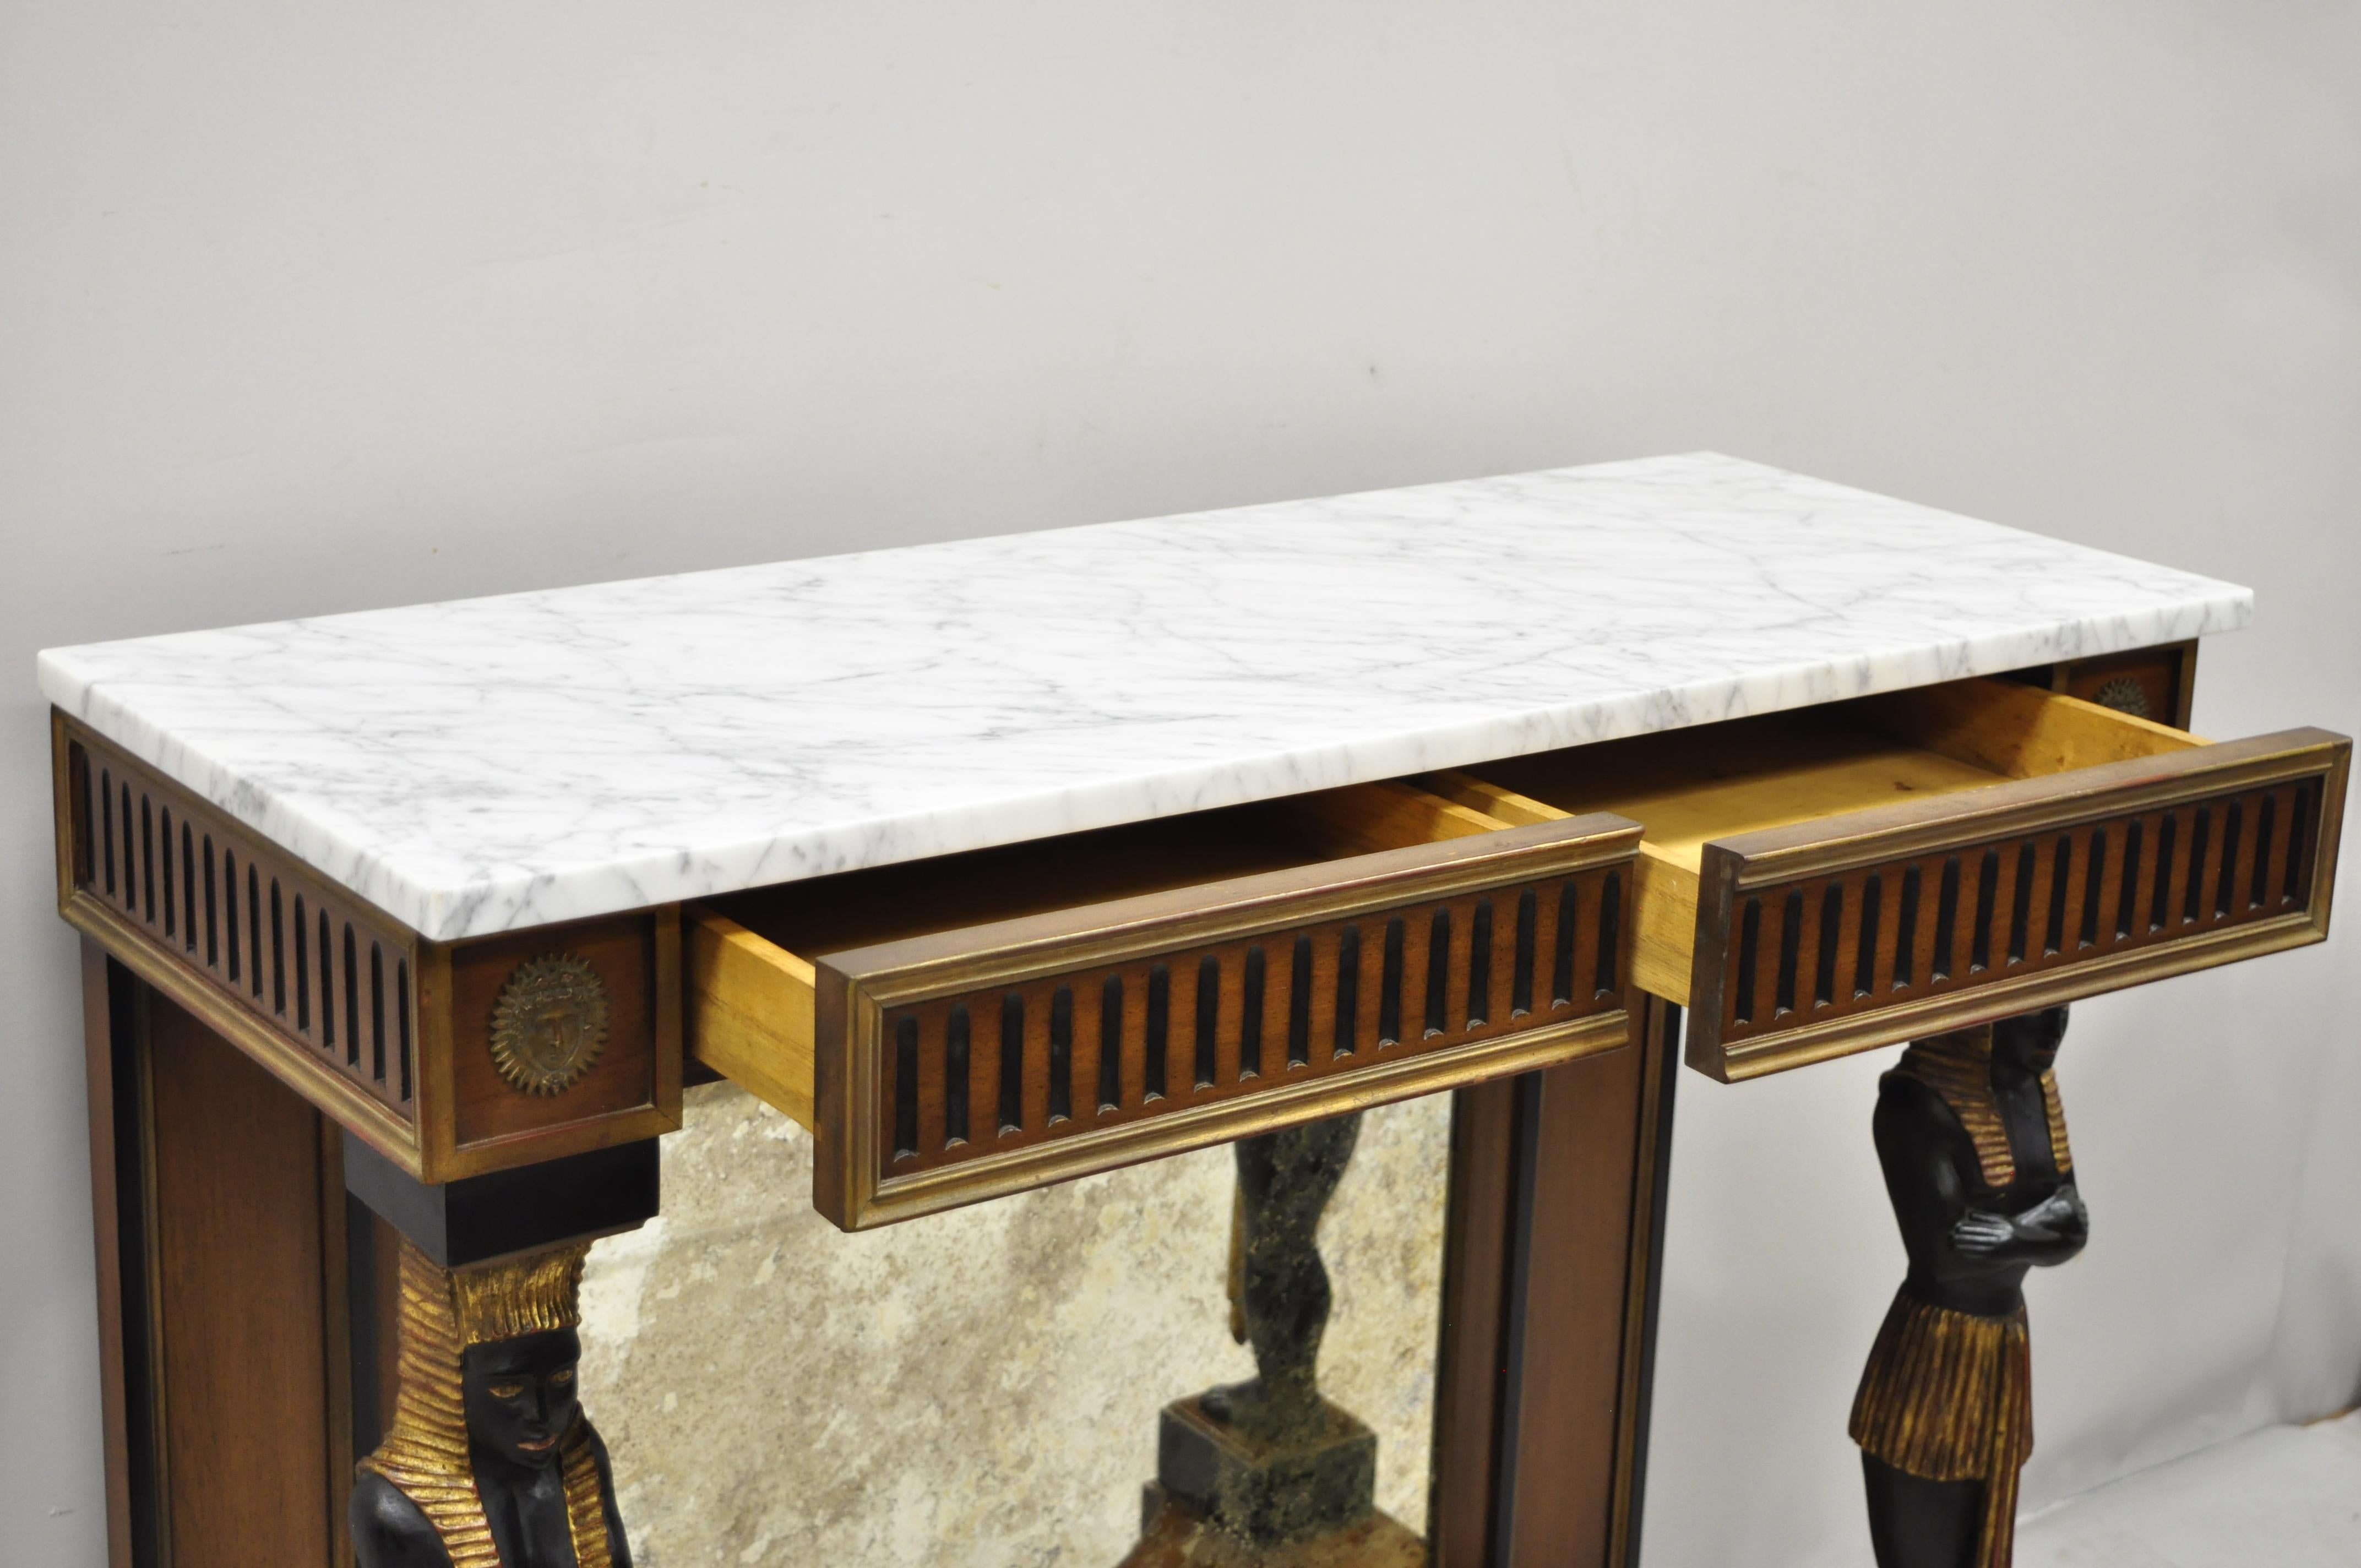 20th Century Egyptian Revival Marble Top Figural Carved Ebonized Console Hall Table w Drawers